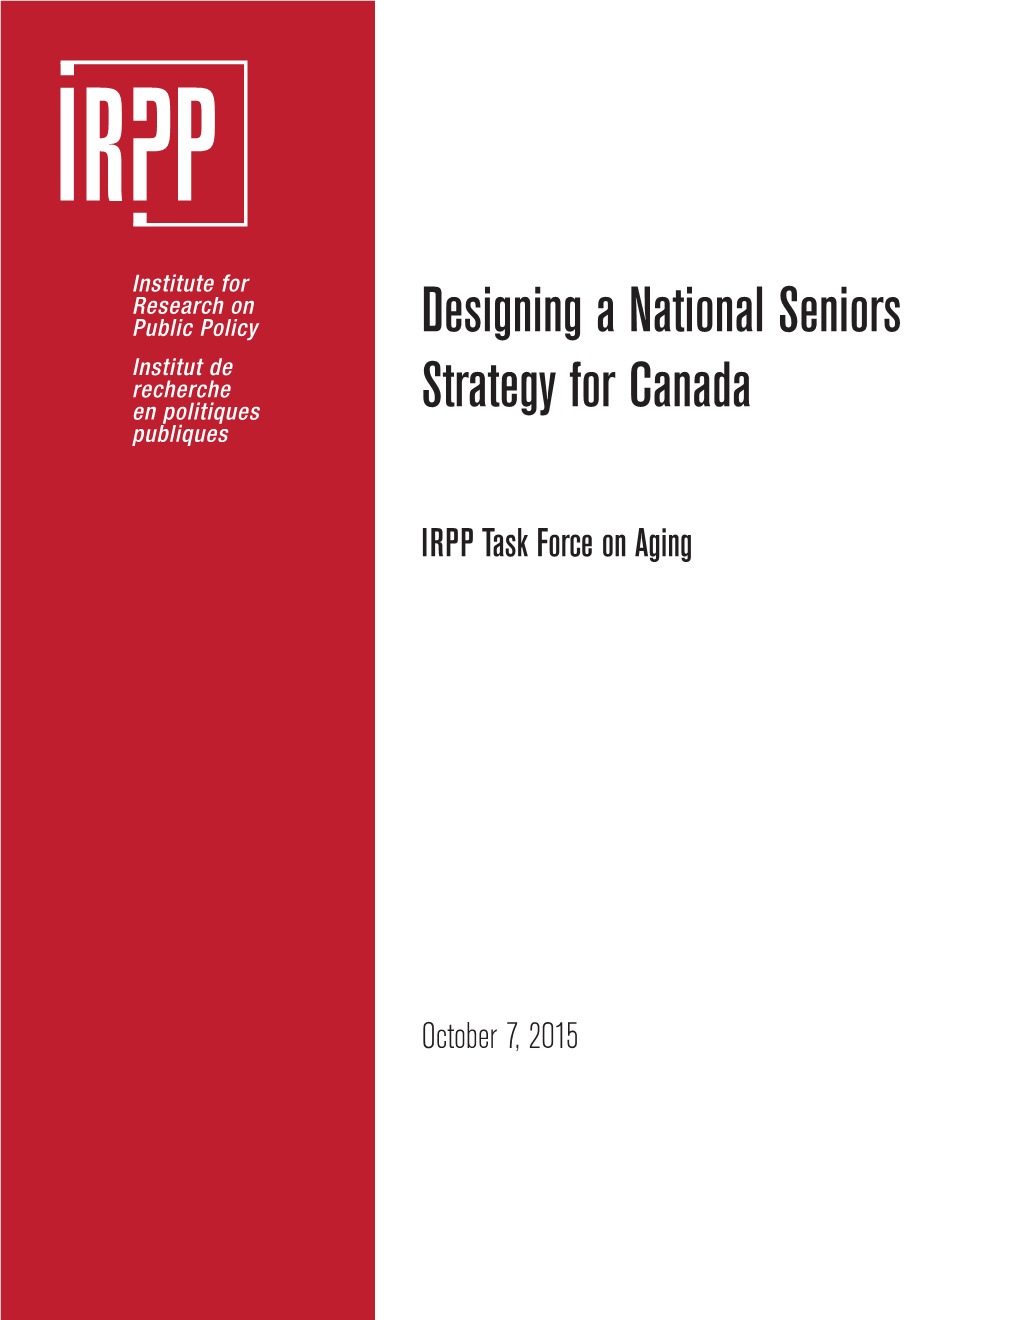 Designing a National Seniors Strategy for Canada